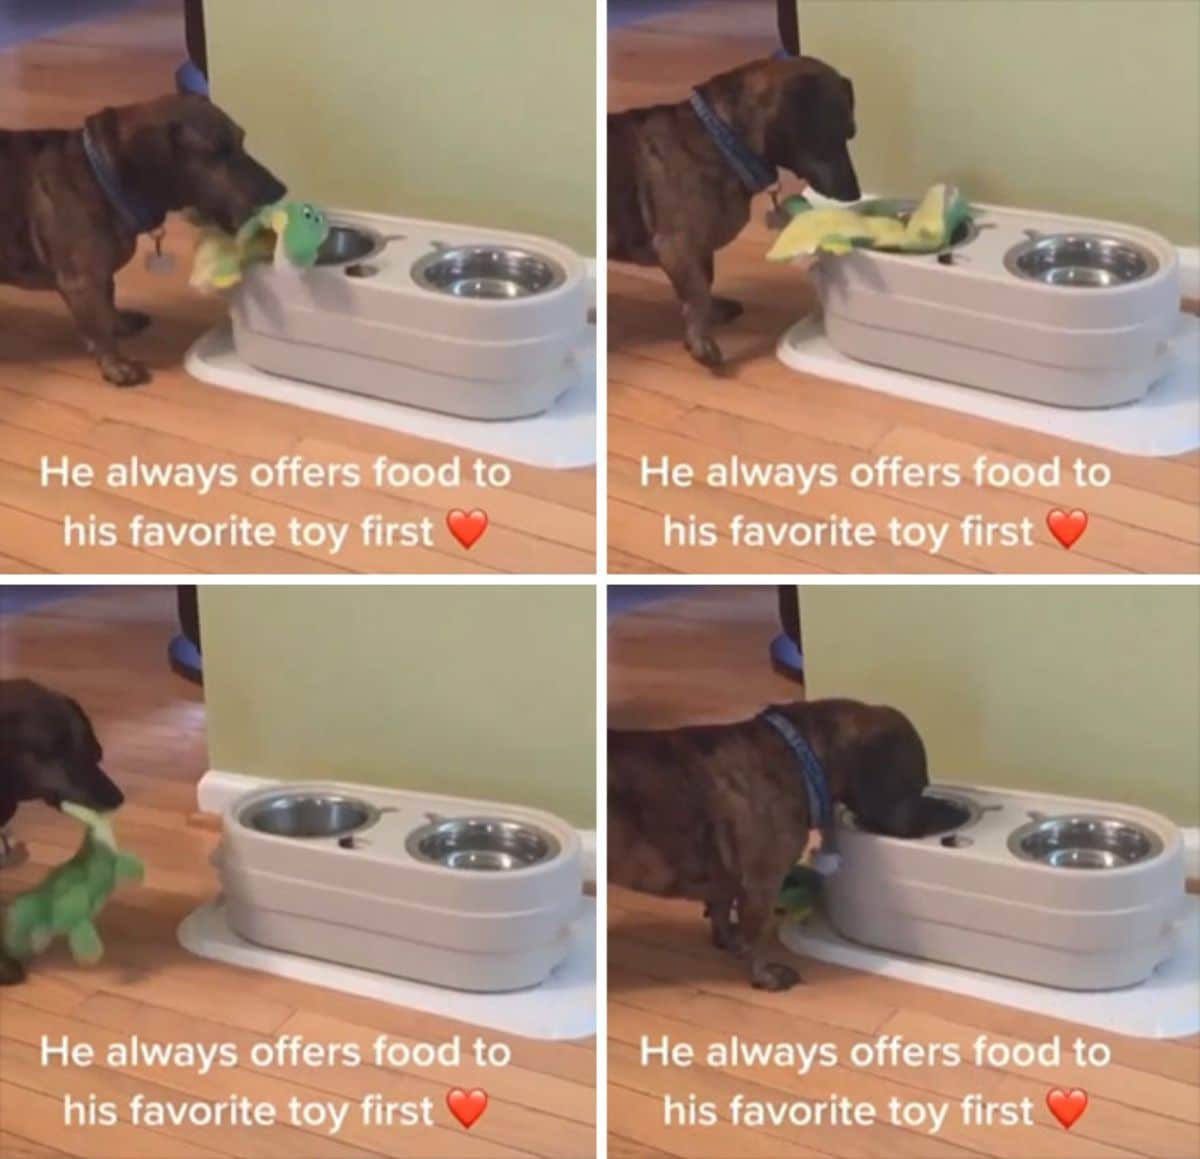 4 photos of a dachshund brining a green dino toy to the food and water bowl with a caption at the bottom